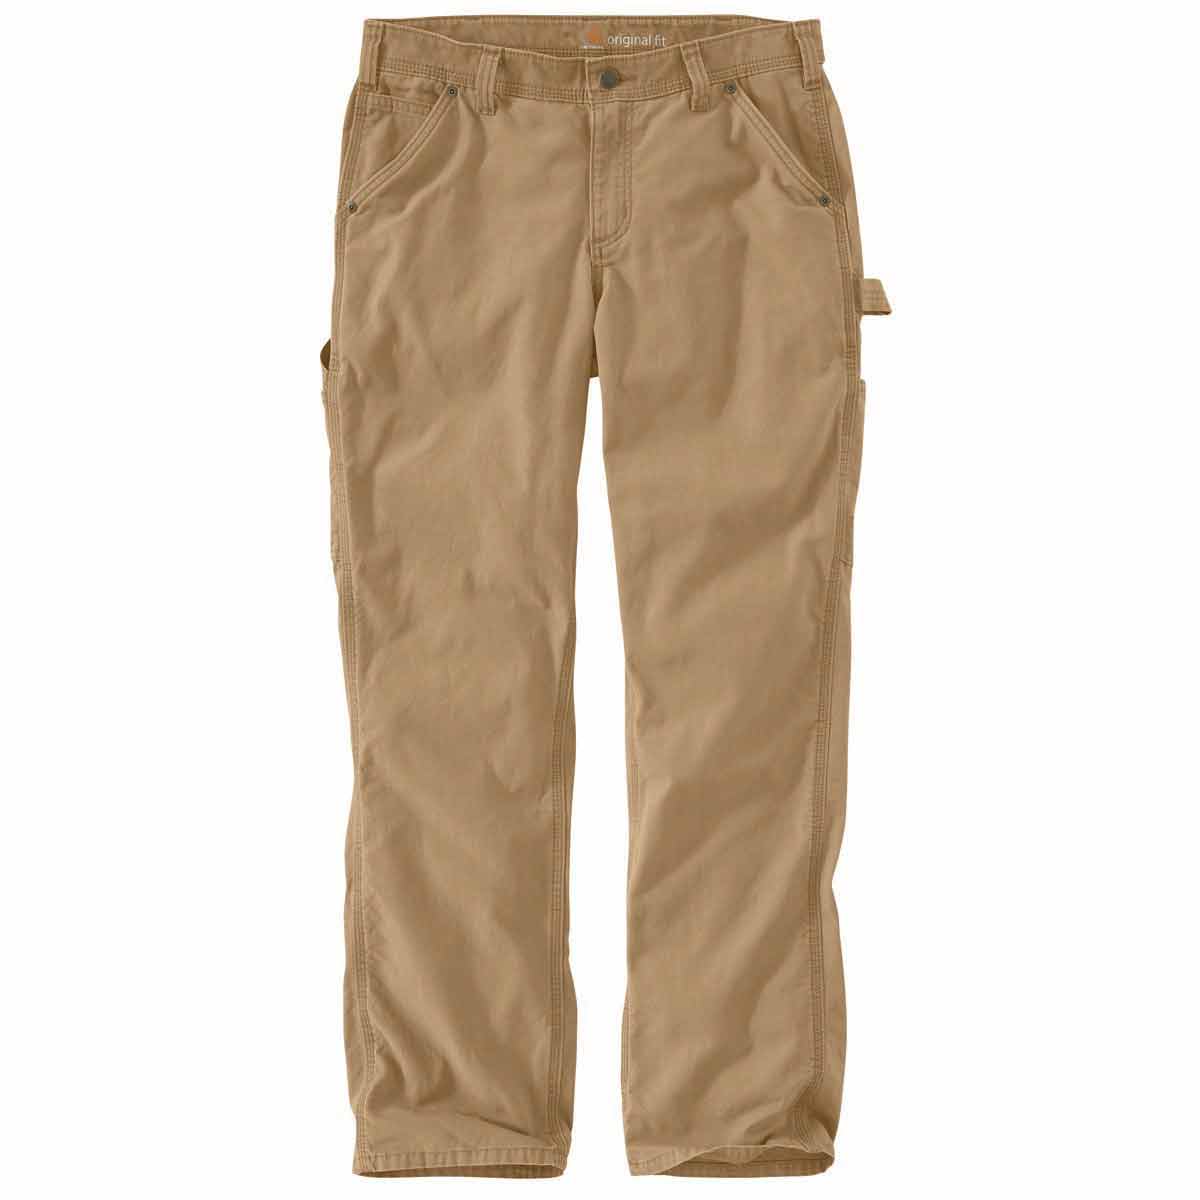 Carhartt Women's Rugged FLex Loose Fit Canvas Work Pant - Discontinued Pricing